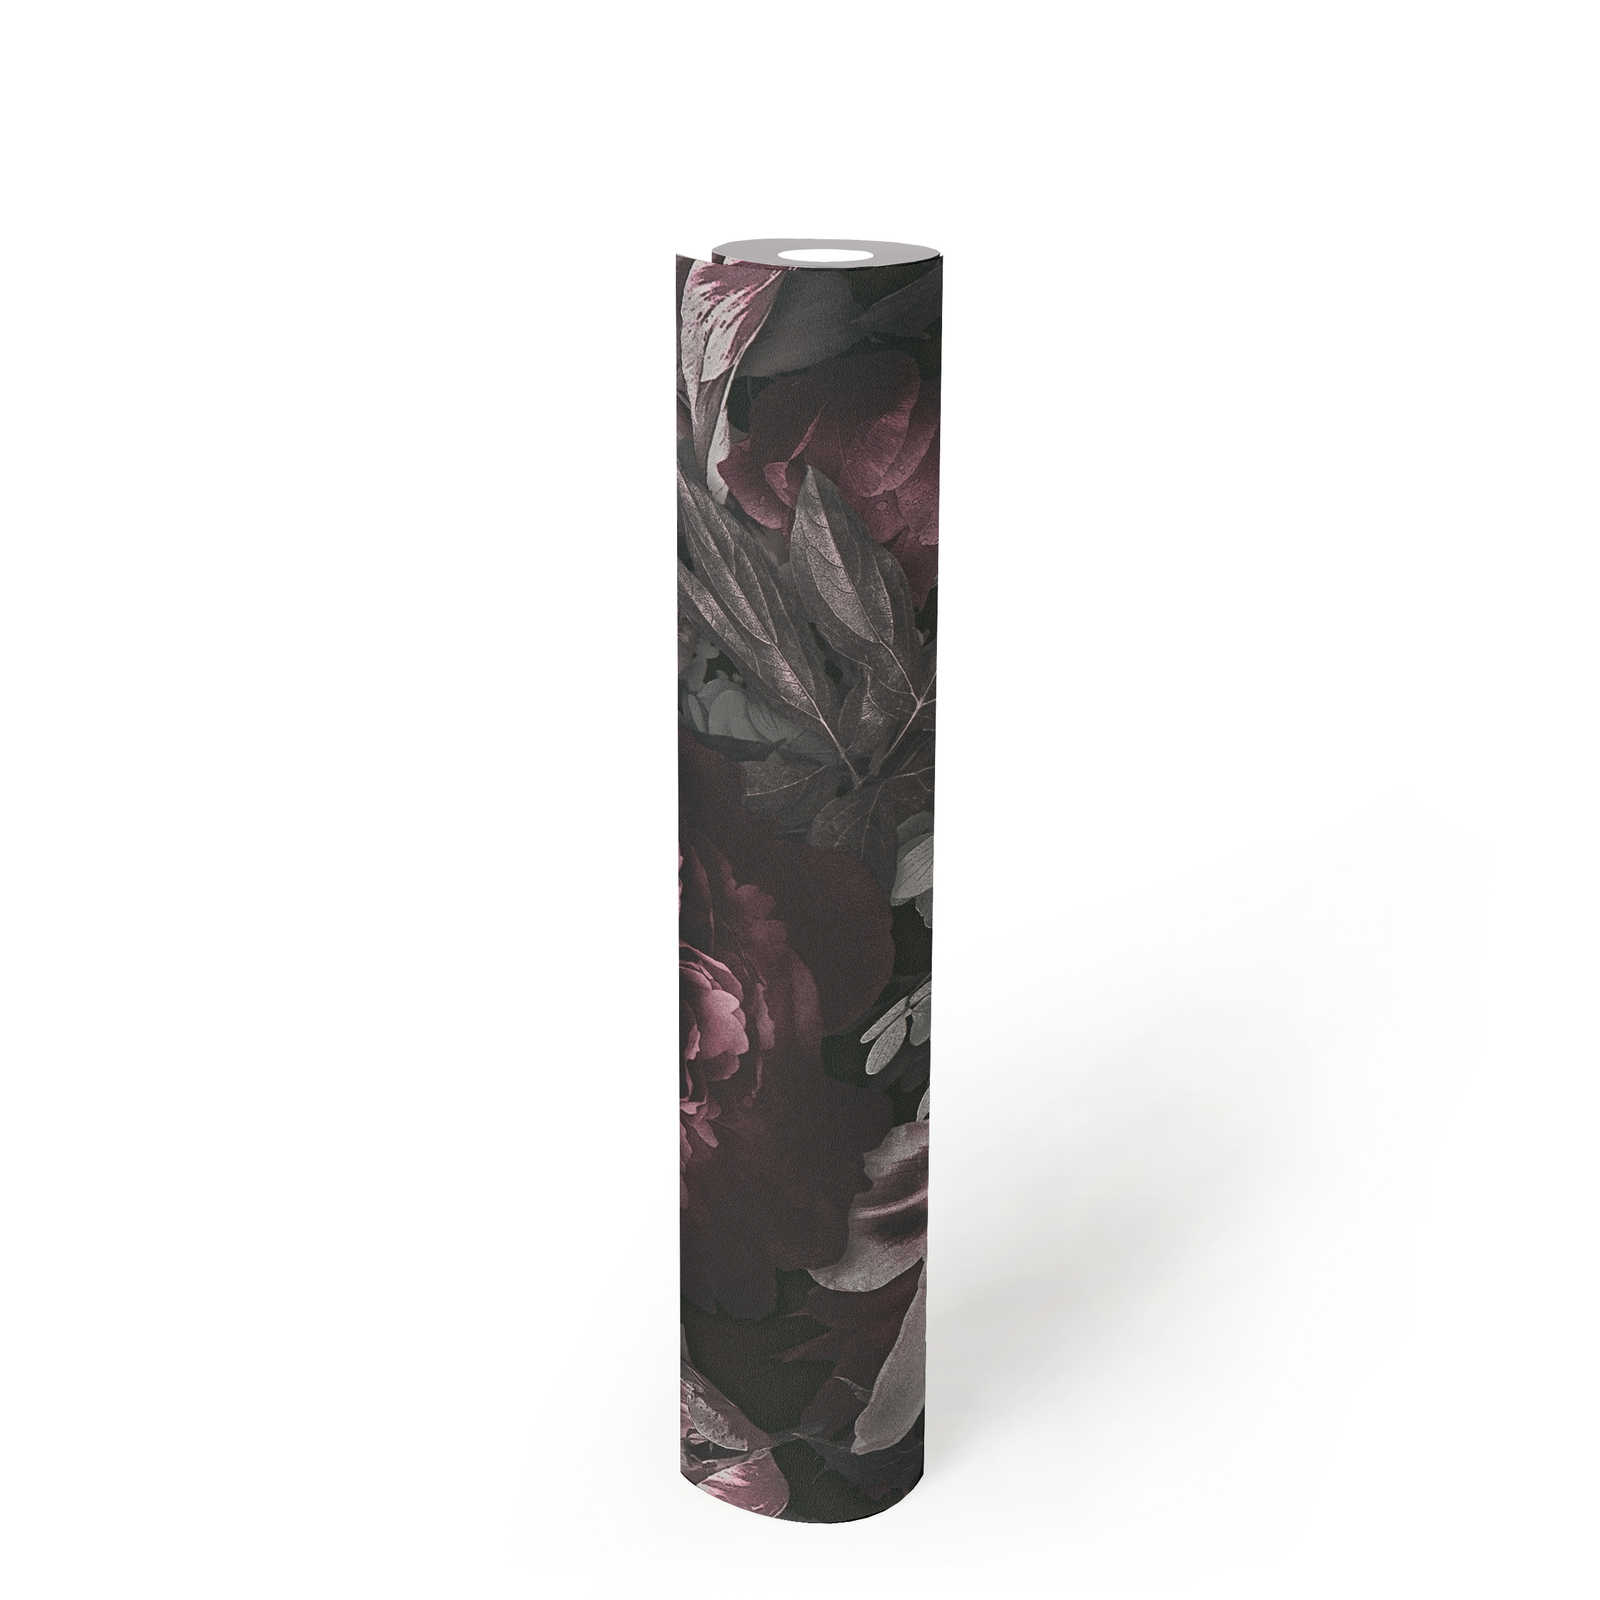             Roses wallpaper flowers in painting style - grey, pink, green
        